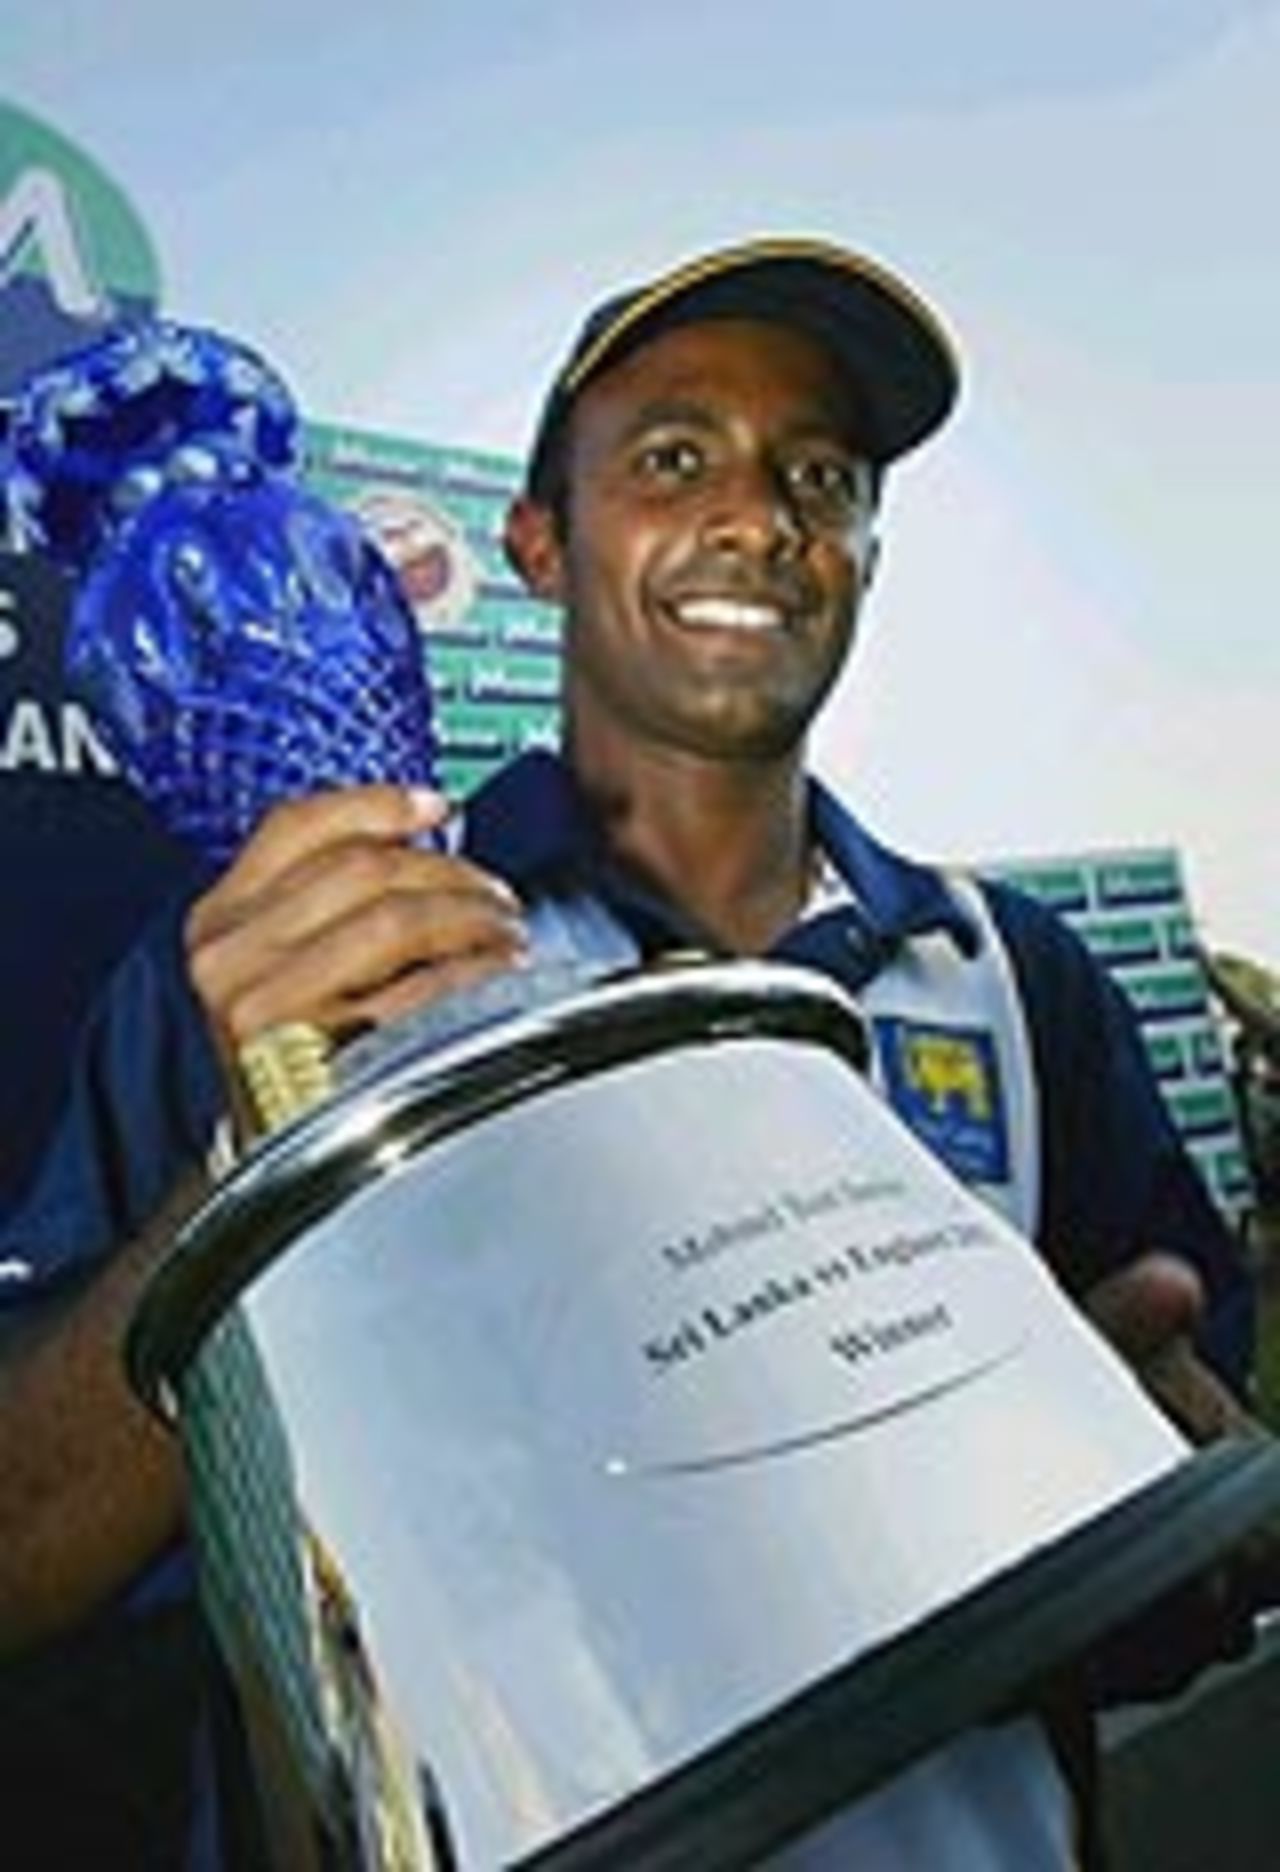 Hashan Tillakaratne poses with the trophy after beating England, December 21, 2003